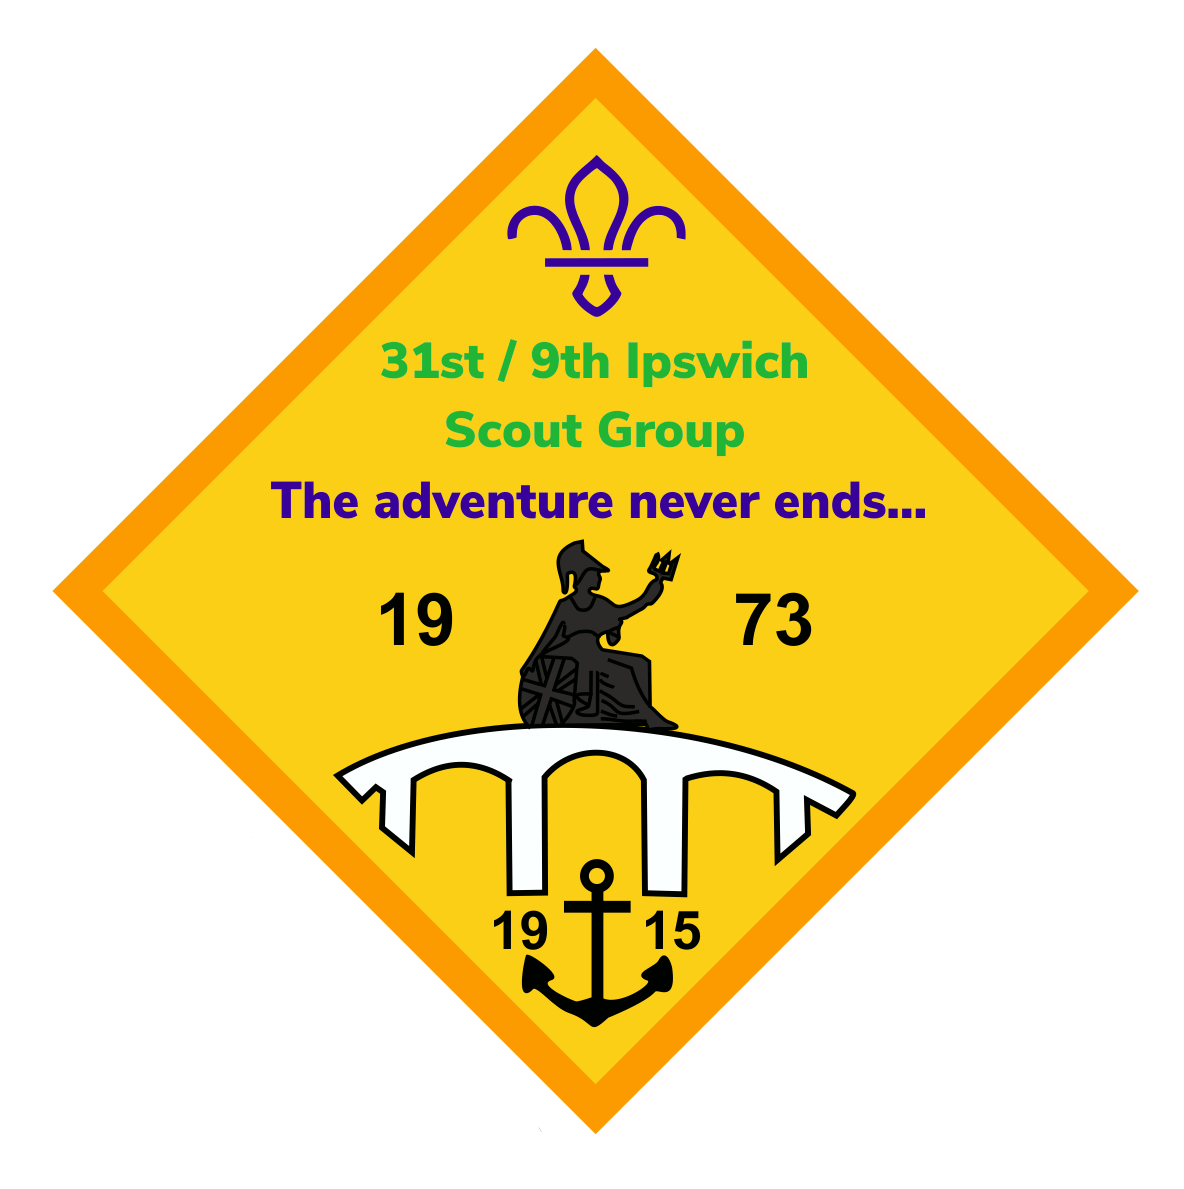 Welcome to the 31st/9th Ipswich Scout Group website